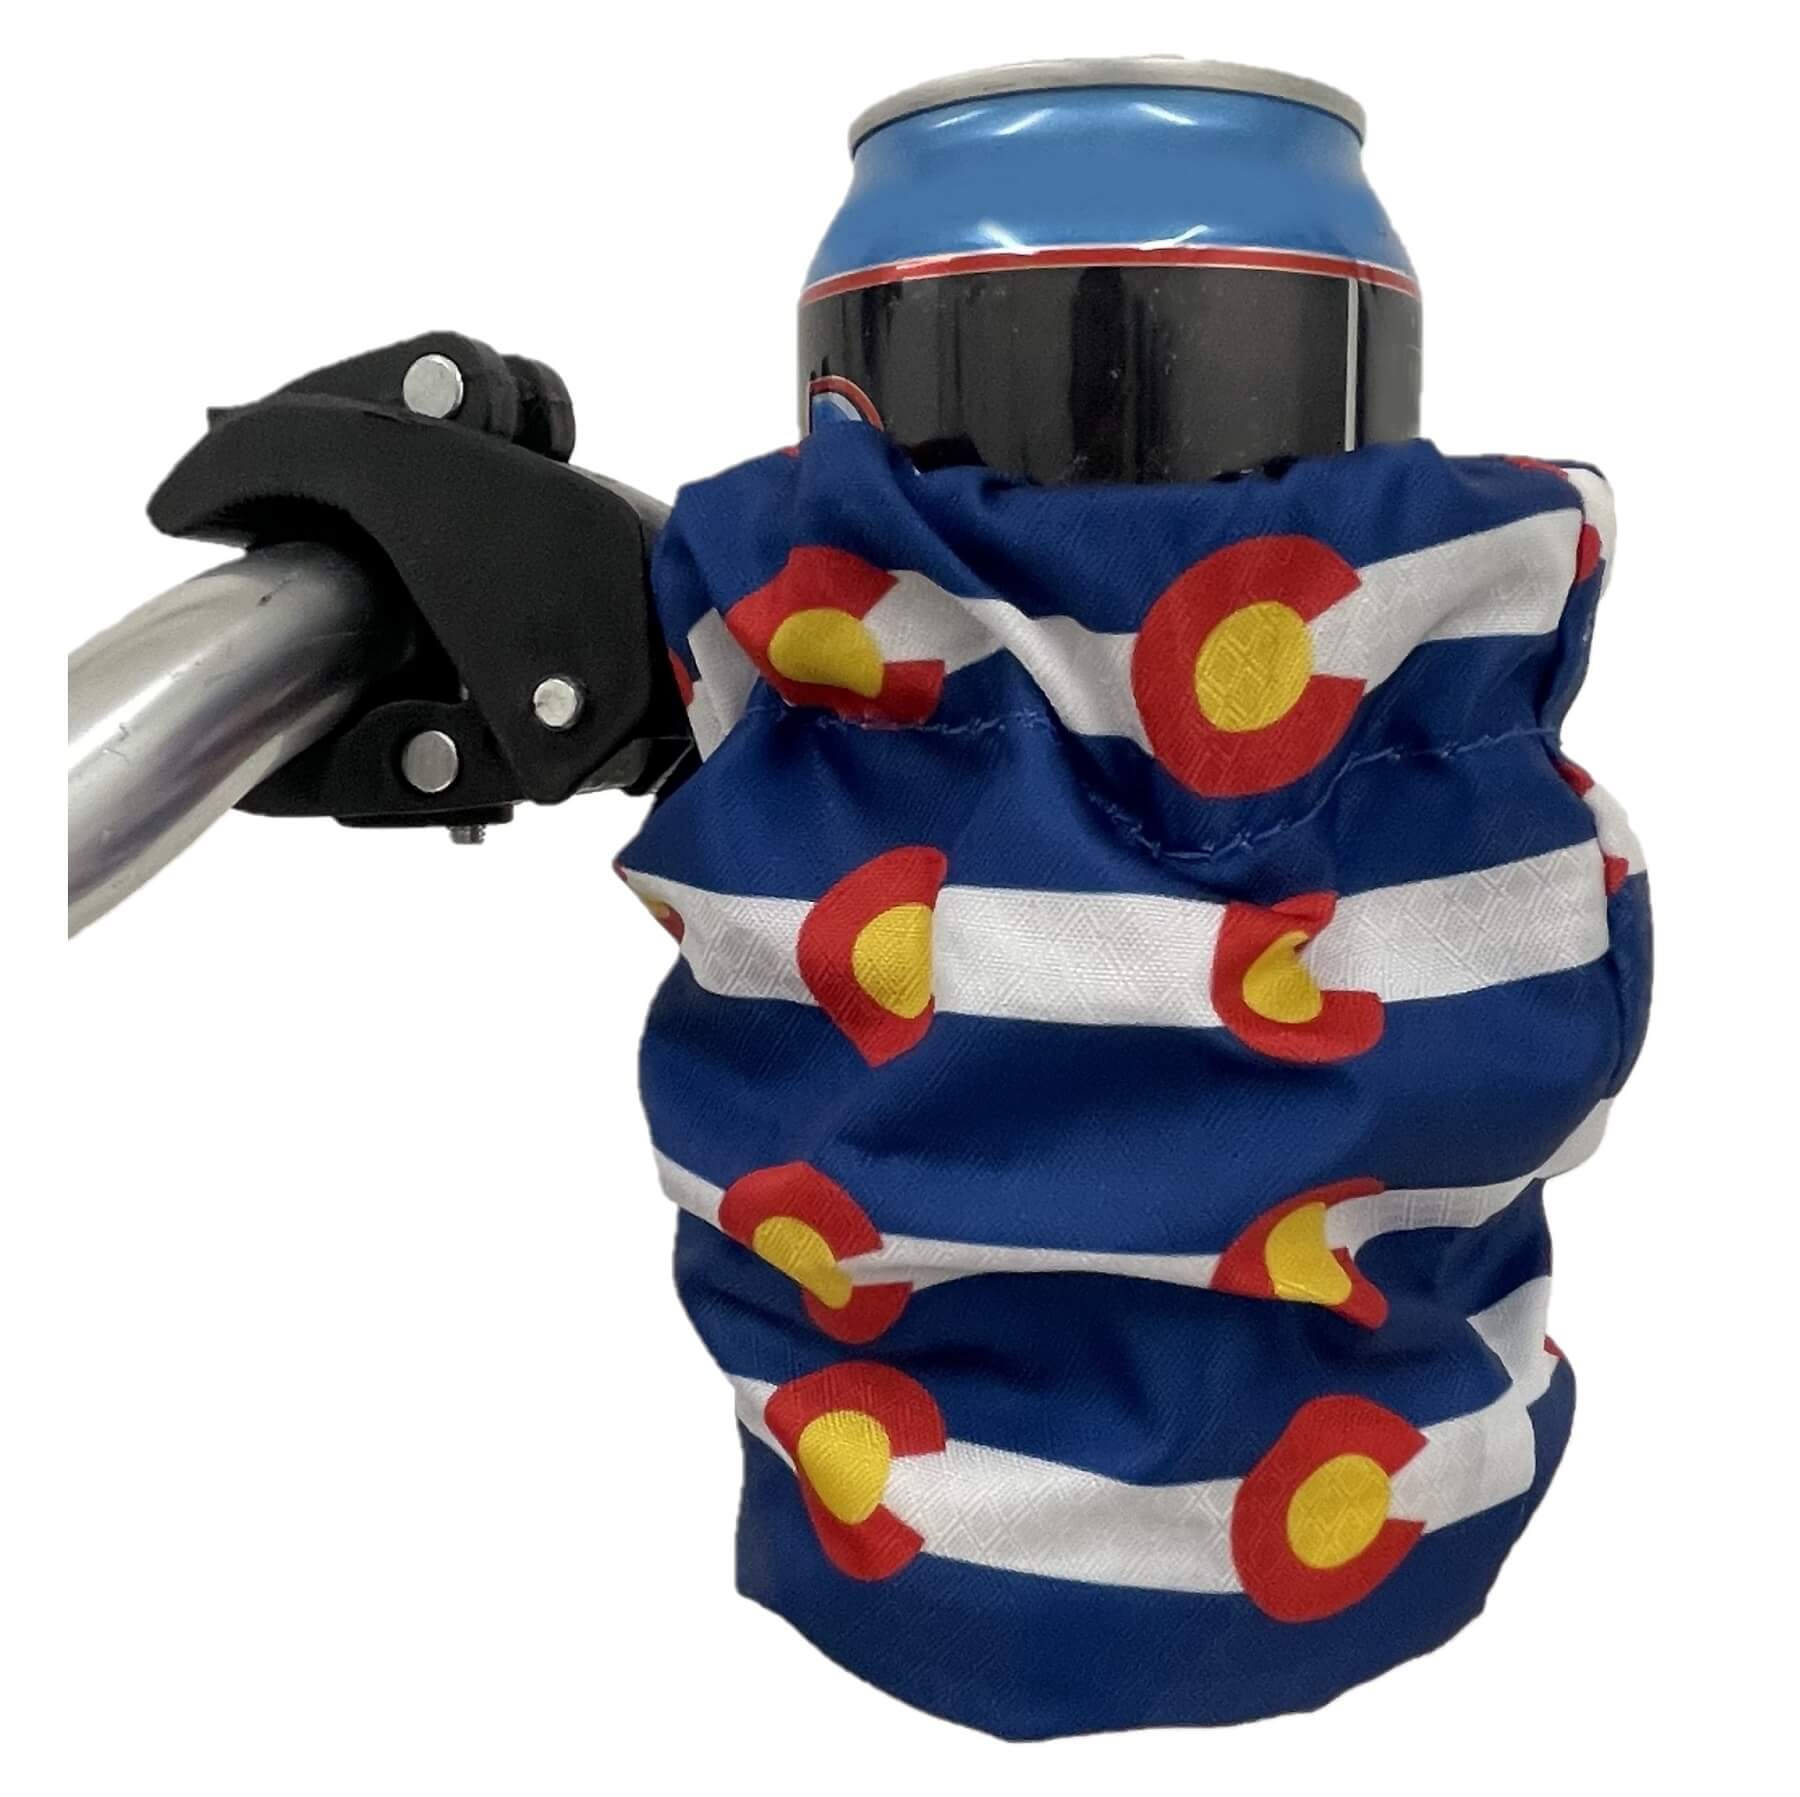 Colorful SS Water Bottle With Pill Holder 01054A - Everich